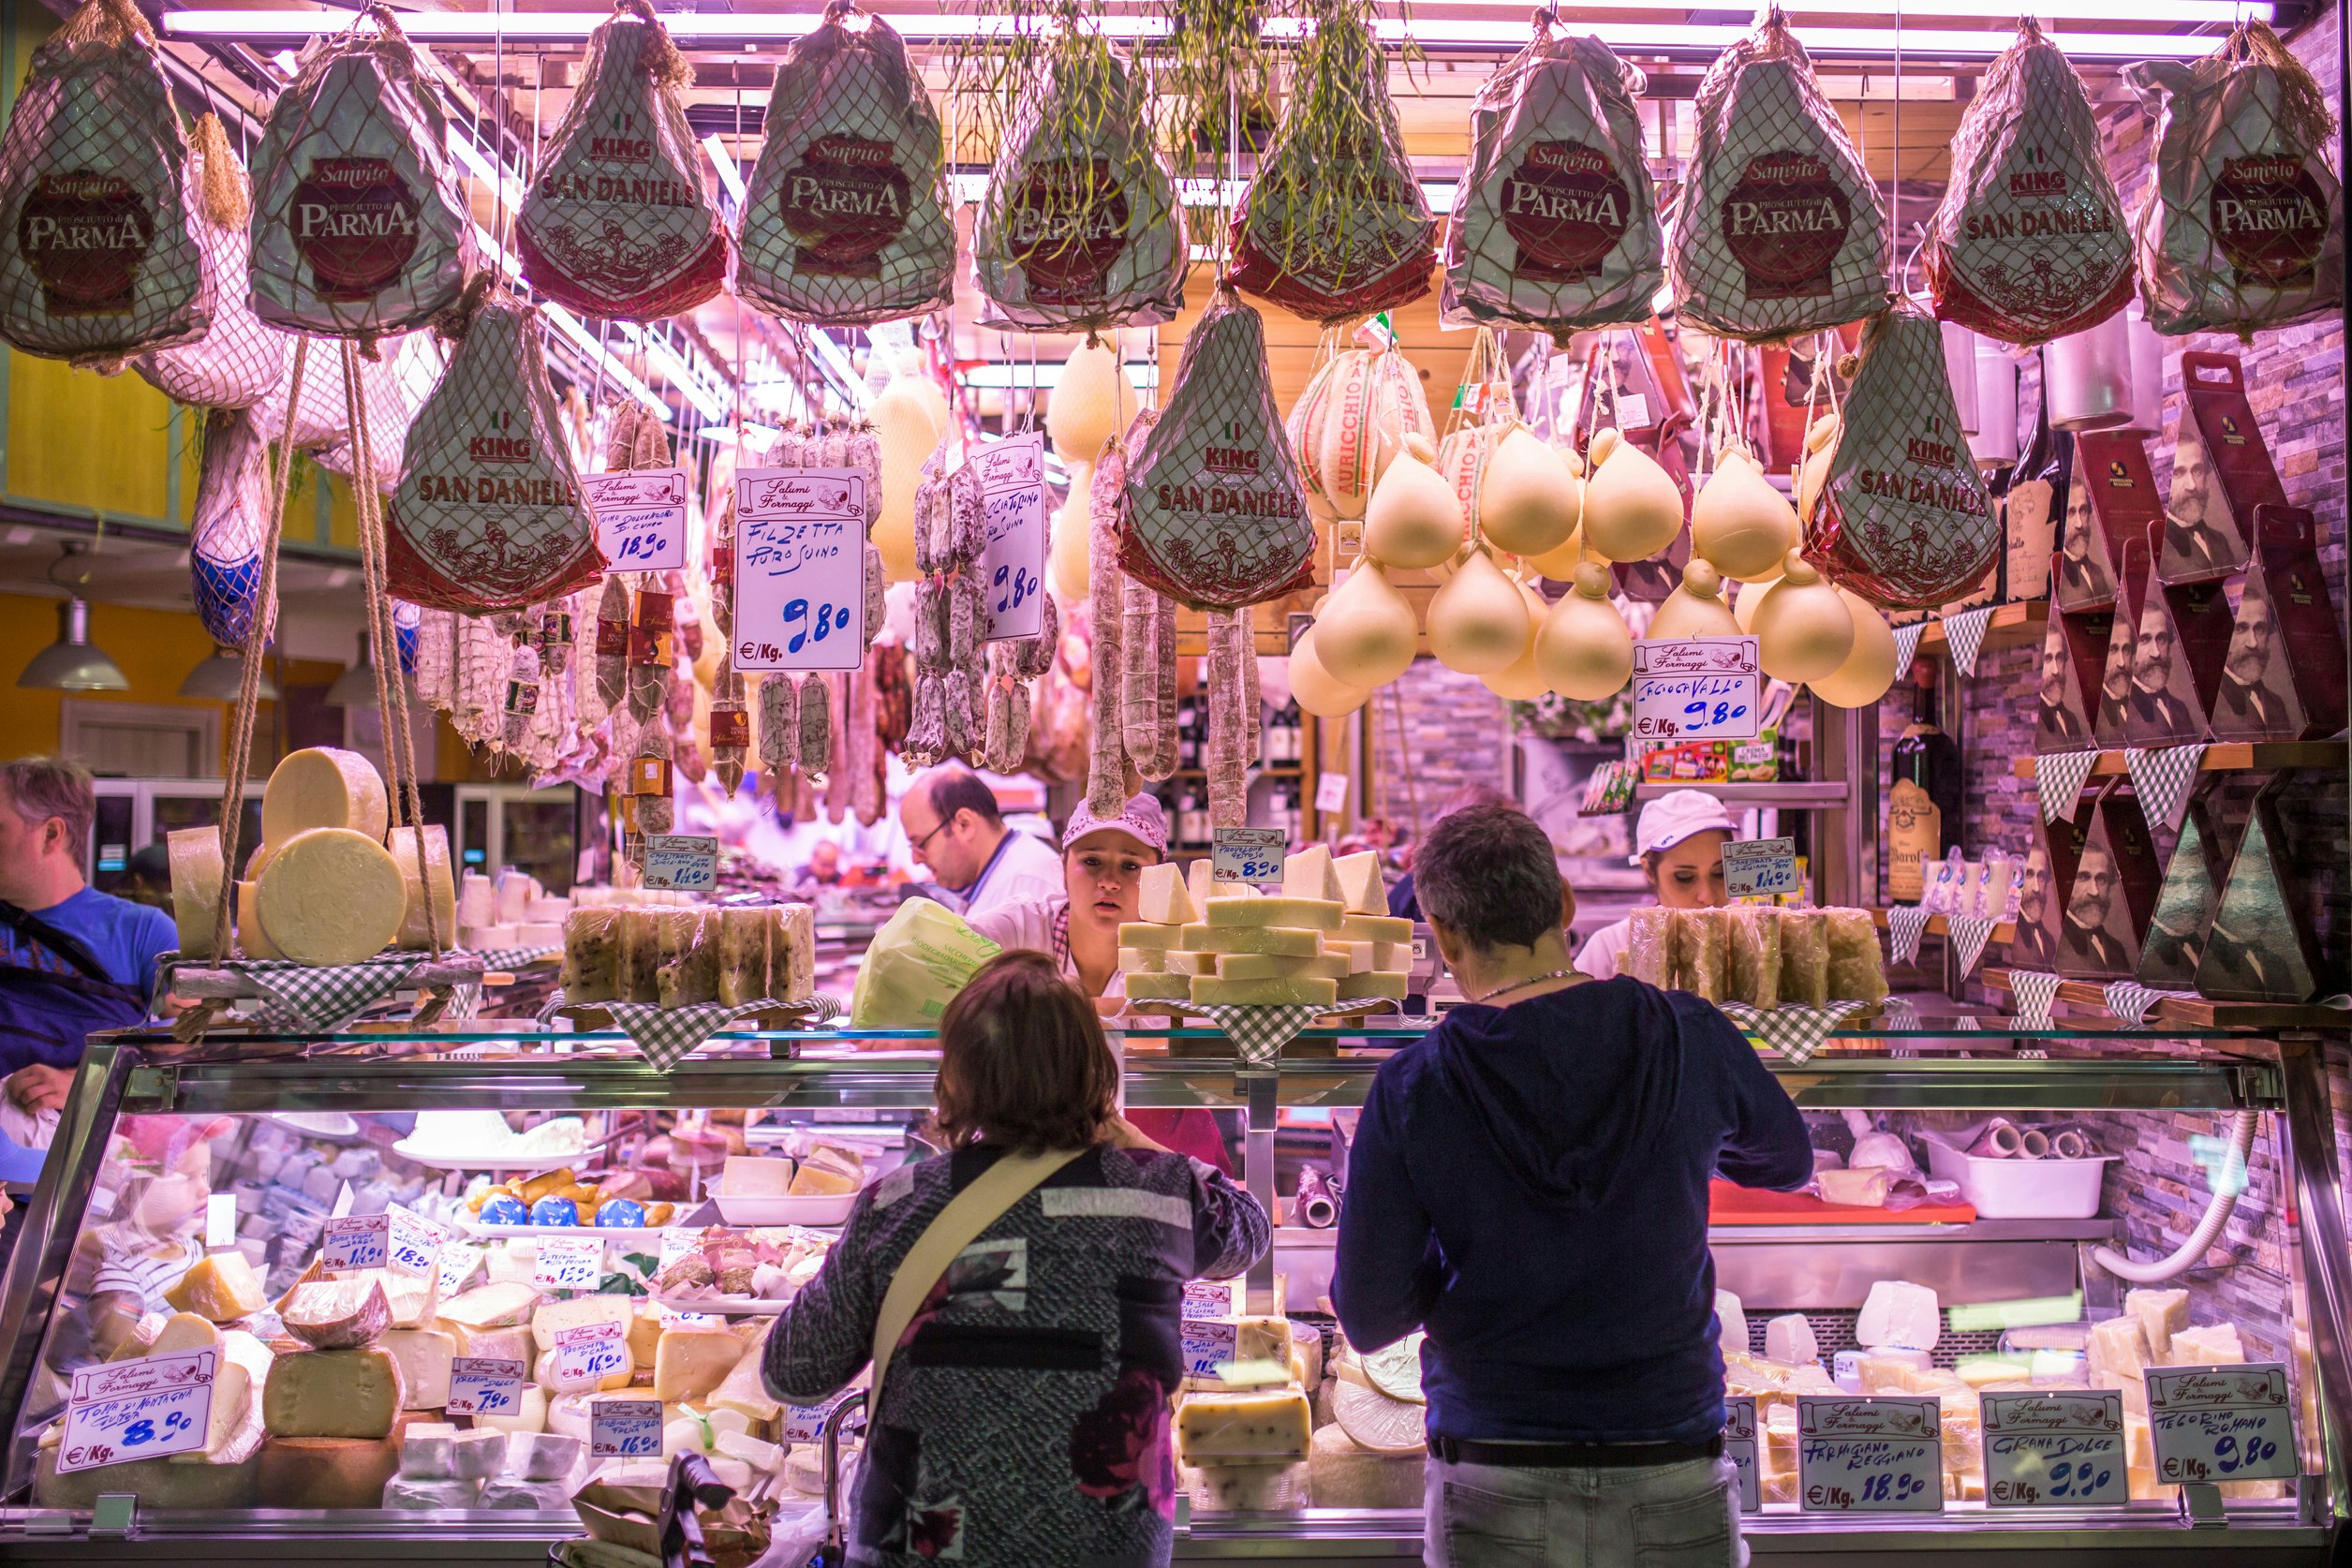 Two people stand at a cheese and meat counter in a market ordering food